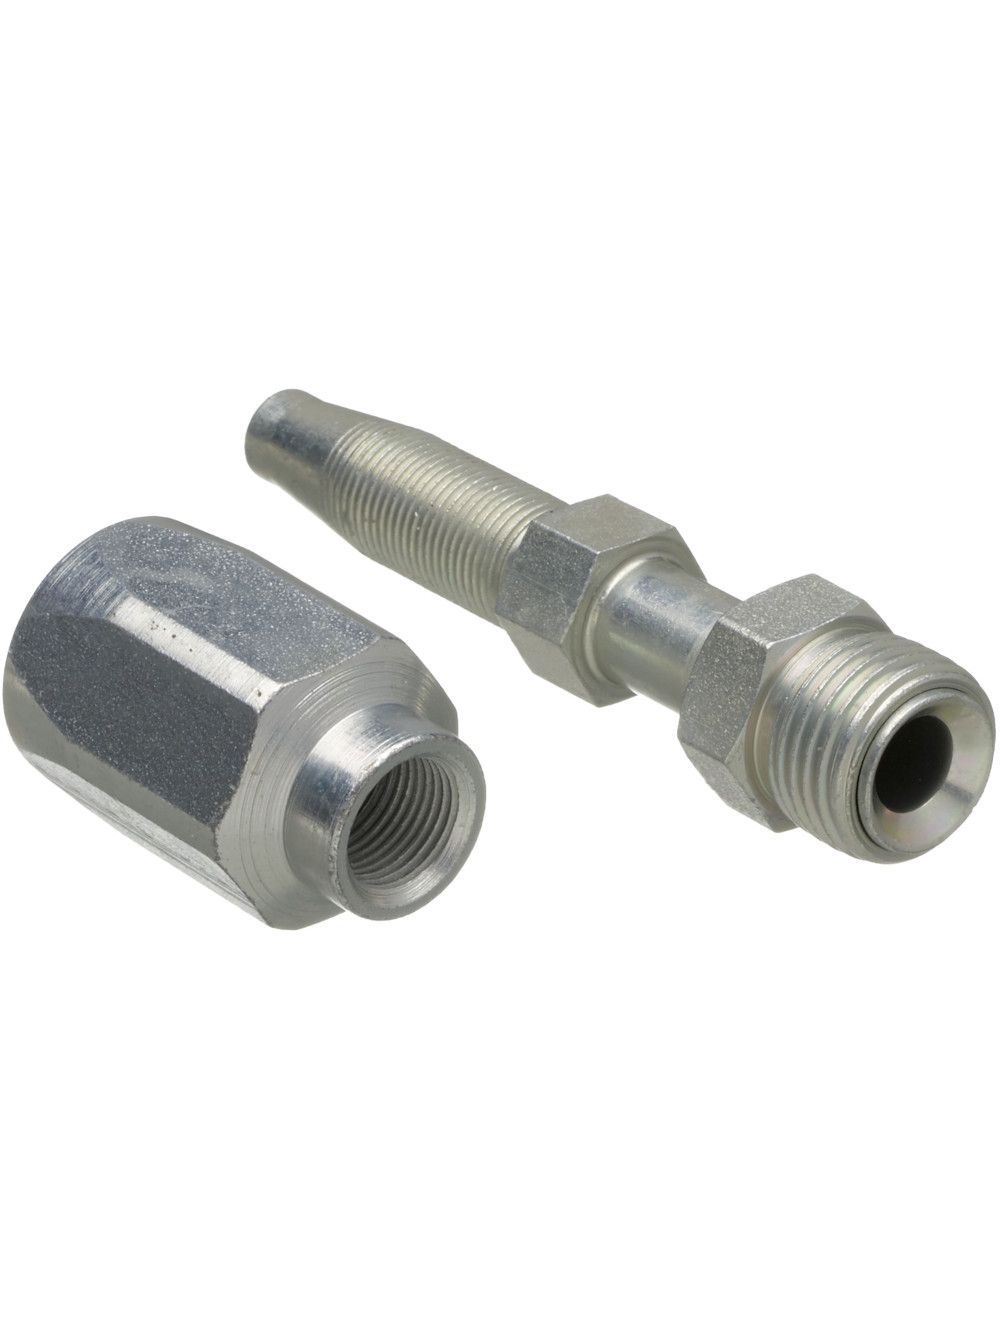 Gates 10C5-8RFJSX Field Attachable for C5C Steel Dual Seat Female JIC 37/SAE 45 Flare Swivel 1/2 ID C5D and C5M Hose 